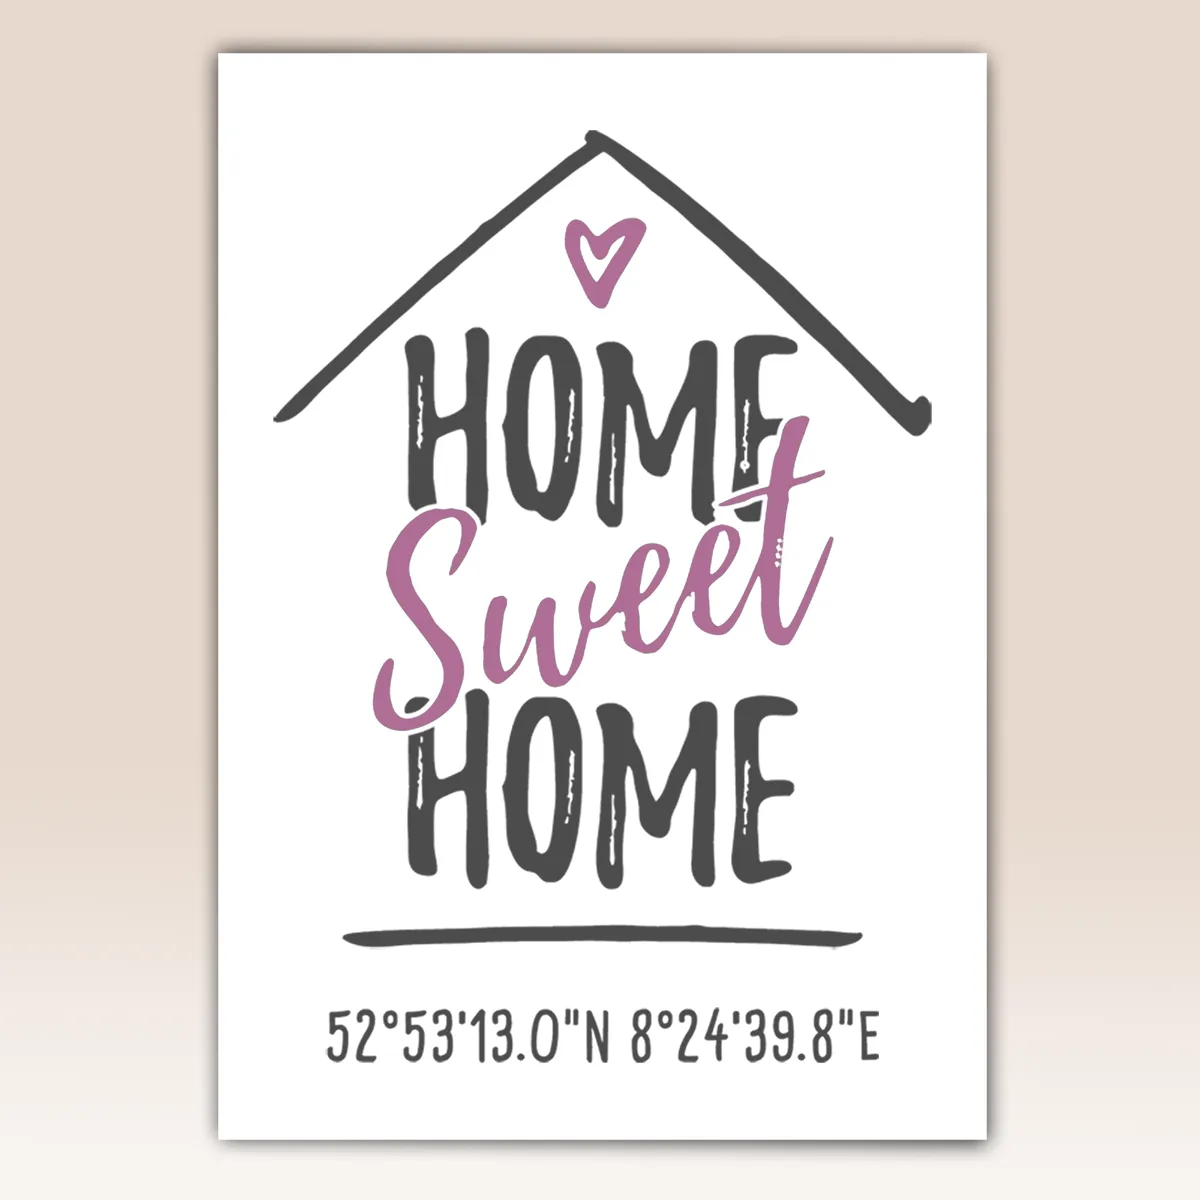 Home sweet Home Poster in Flieder